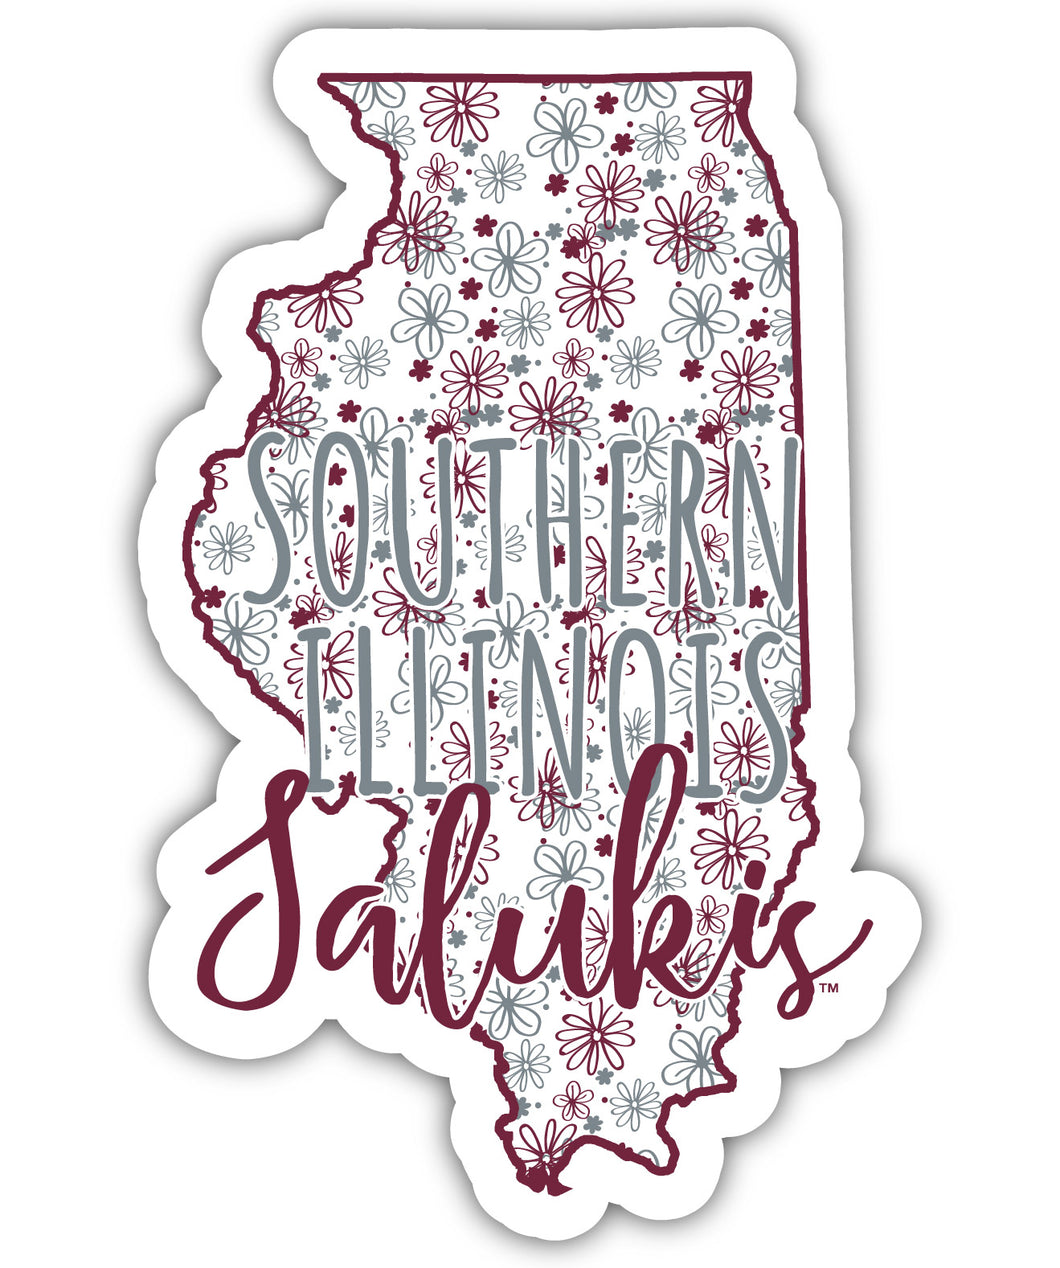 Southern Illinois Salukis 2-Inch on one of its sides Floral Design NCAA Floral Love Vinyl Sticker - Blossoming School Spirit Decal Sticker